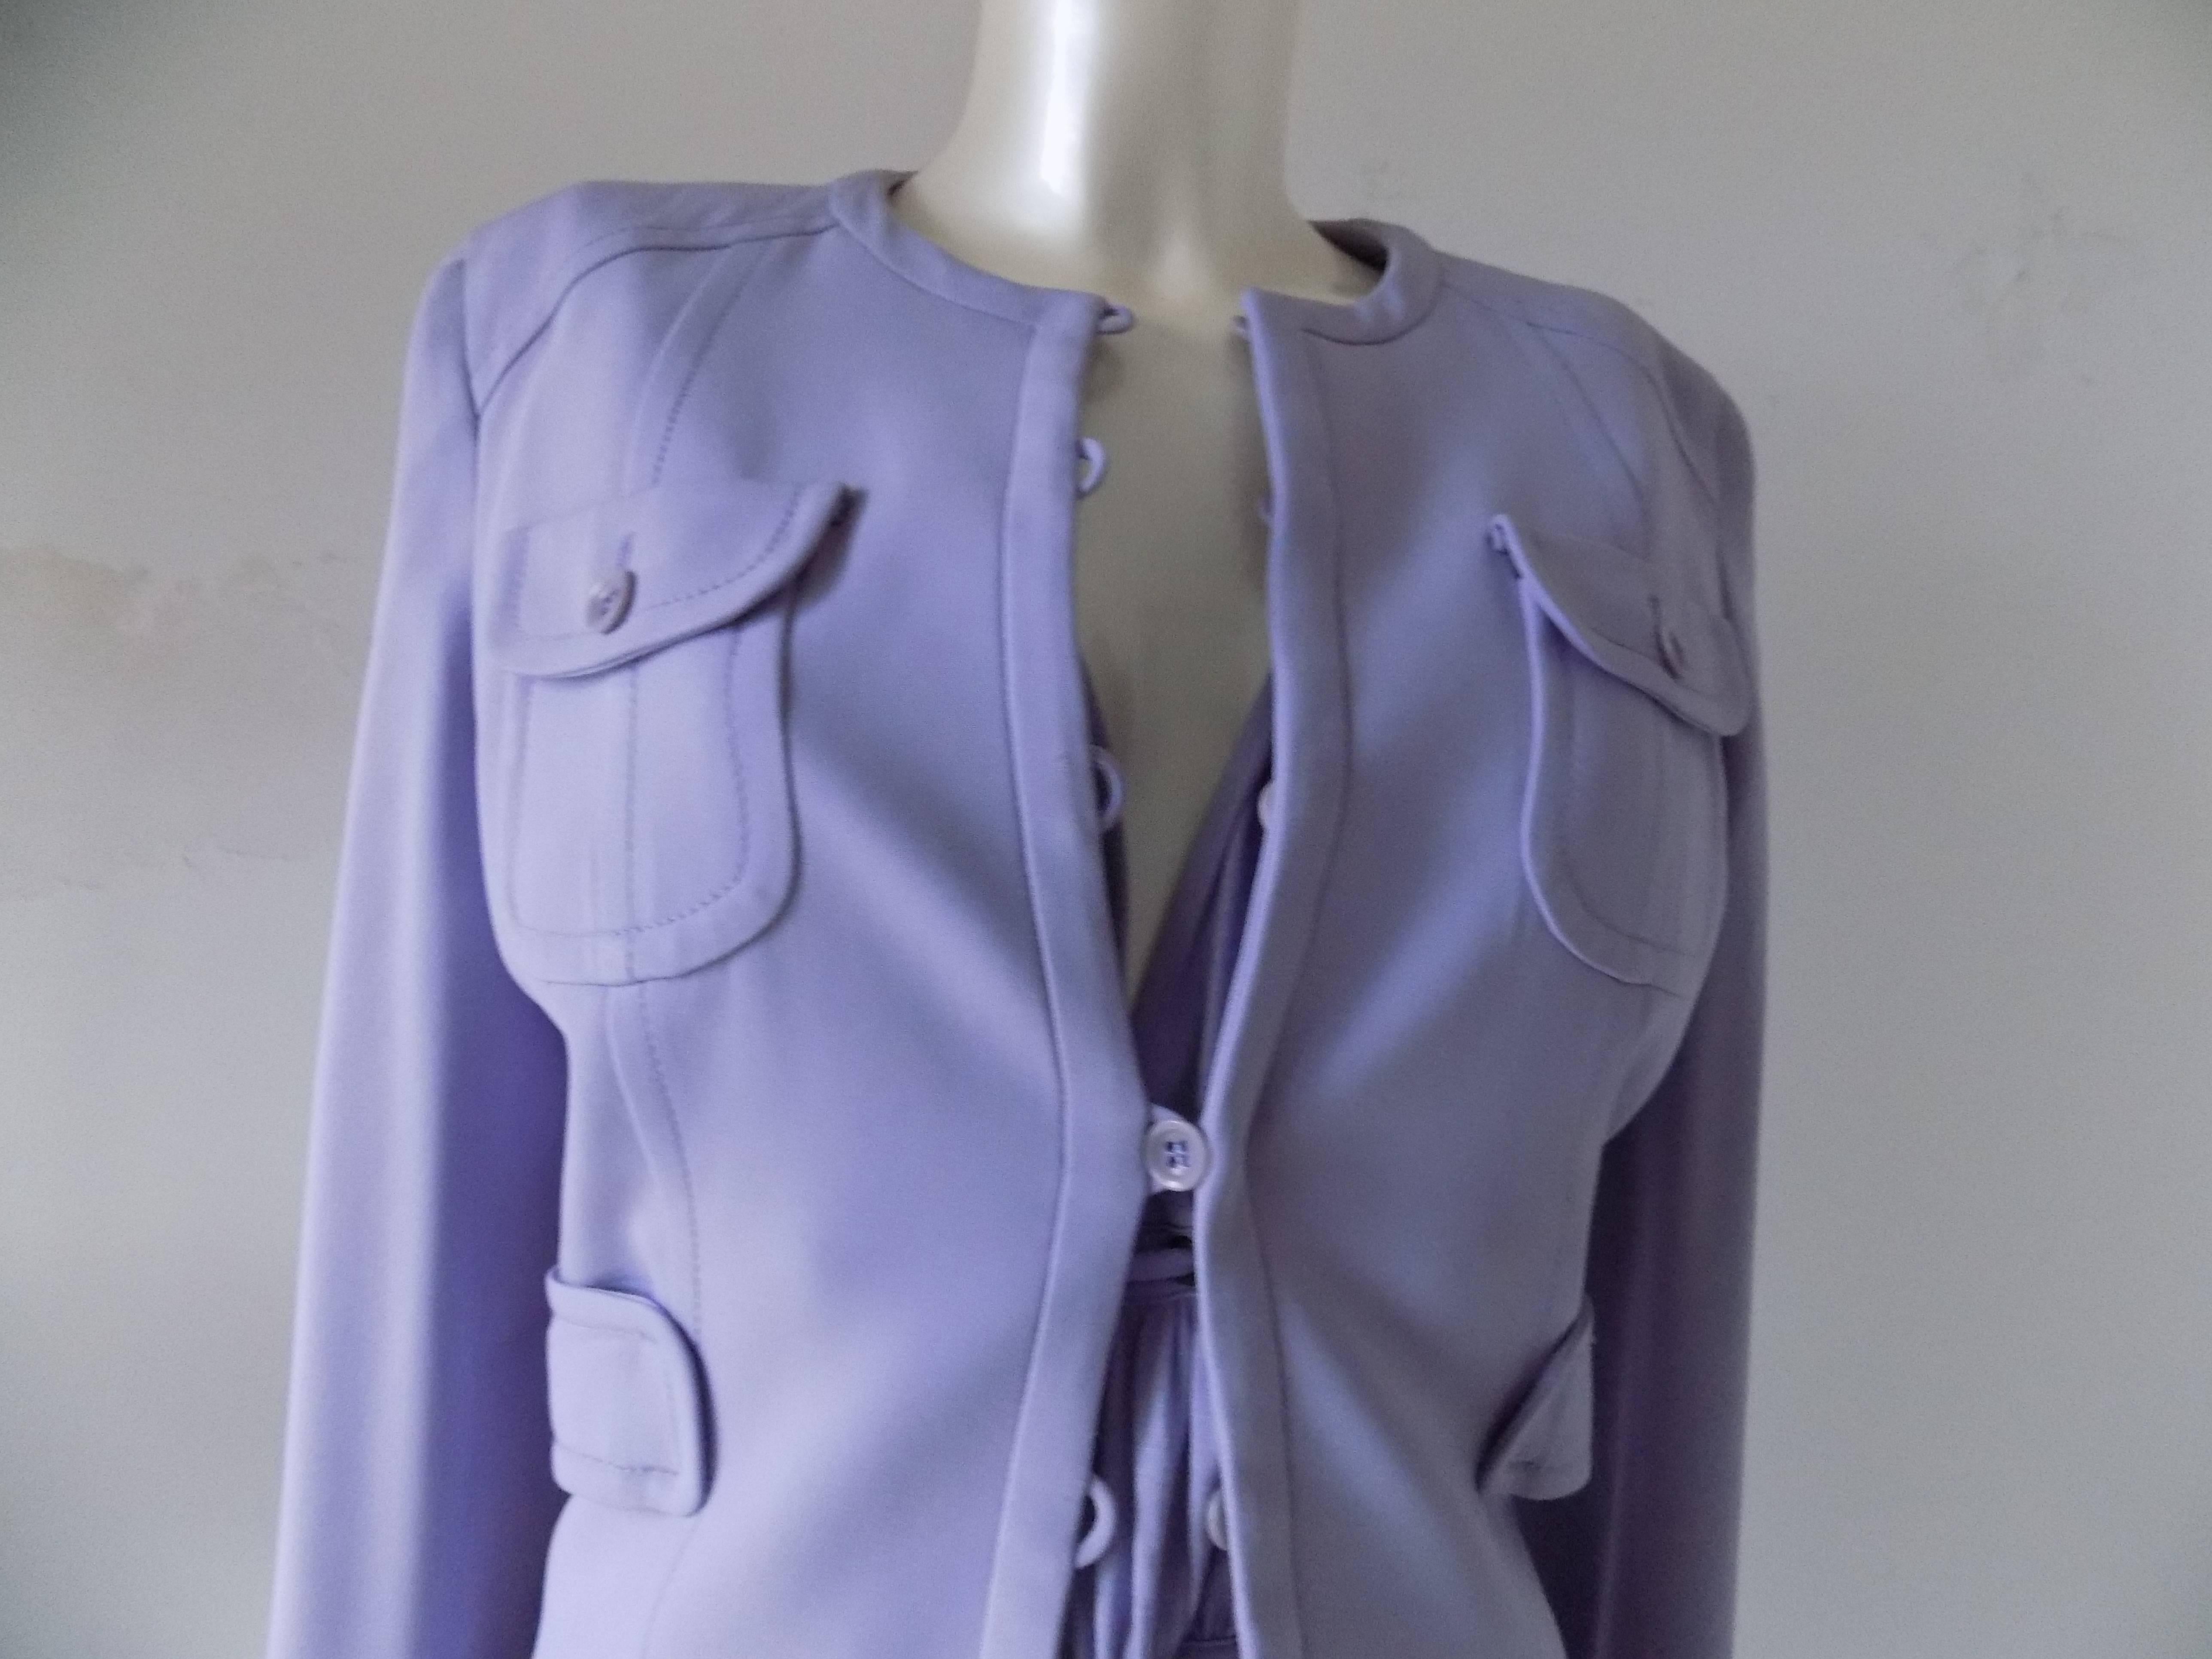 1990s Valentino violet suit and top

Totally made in italy 